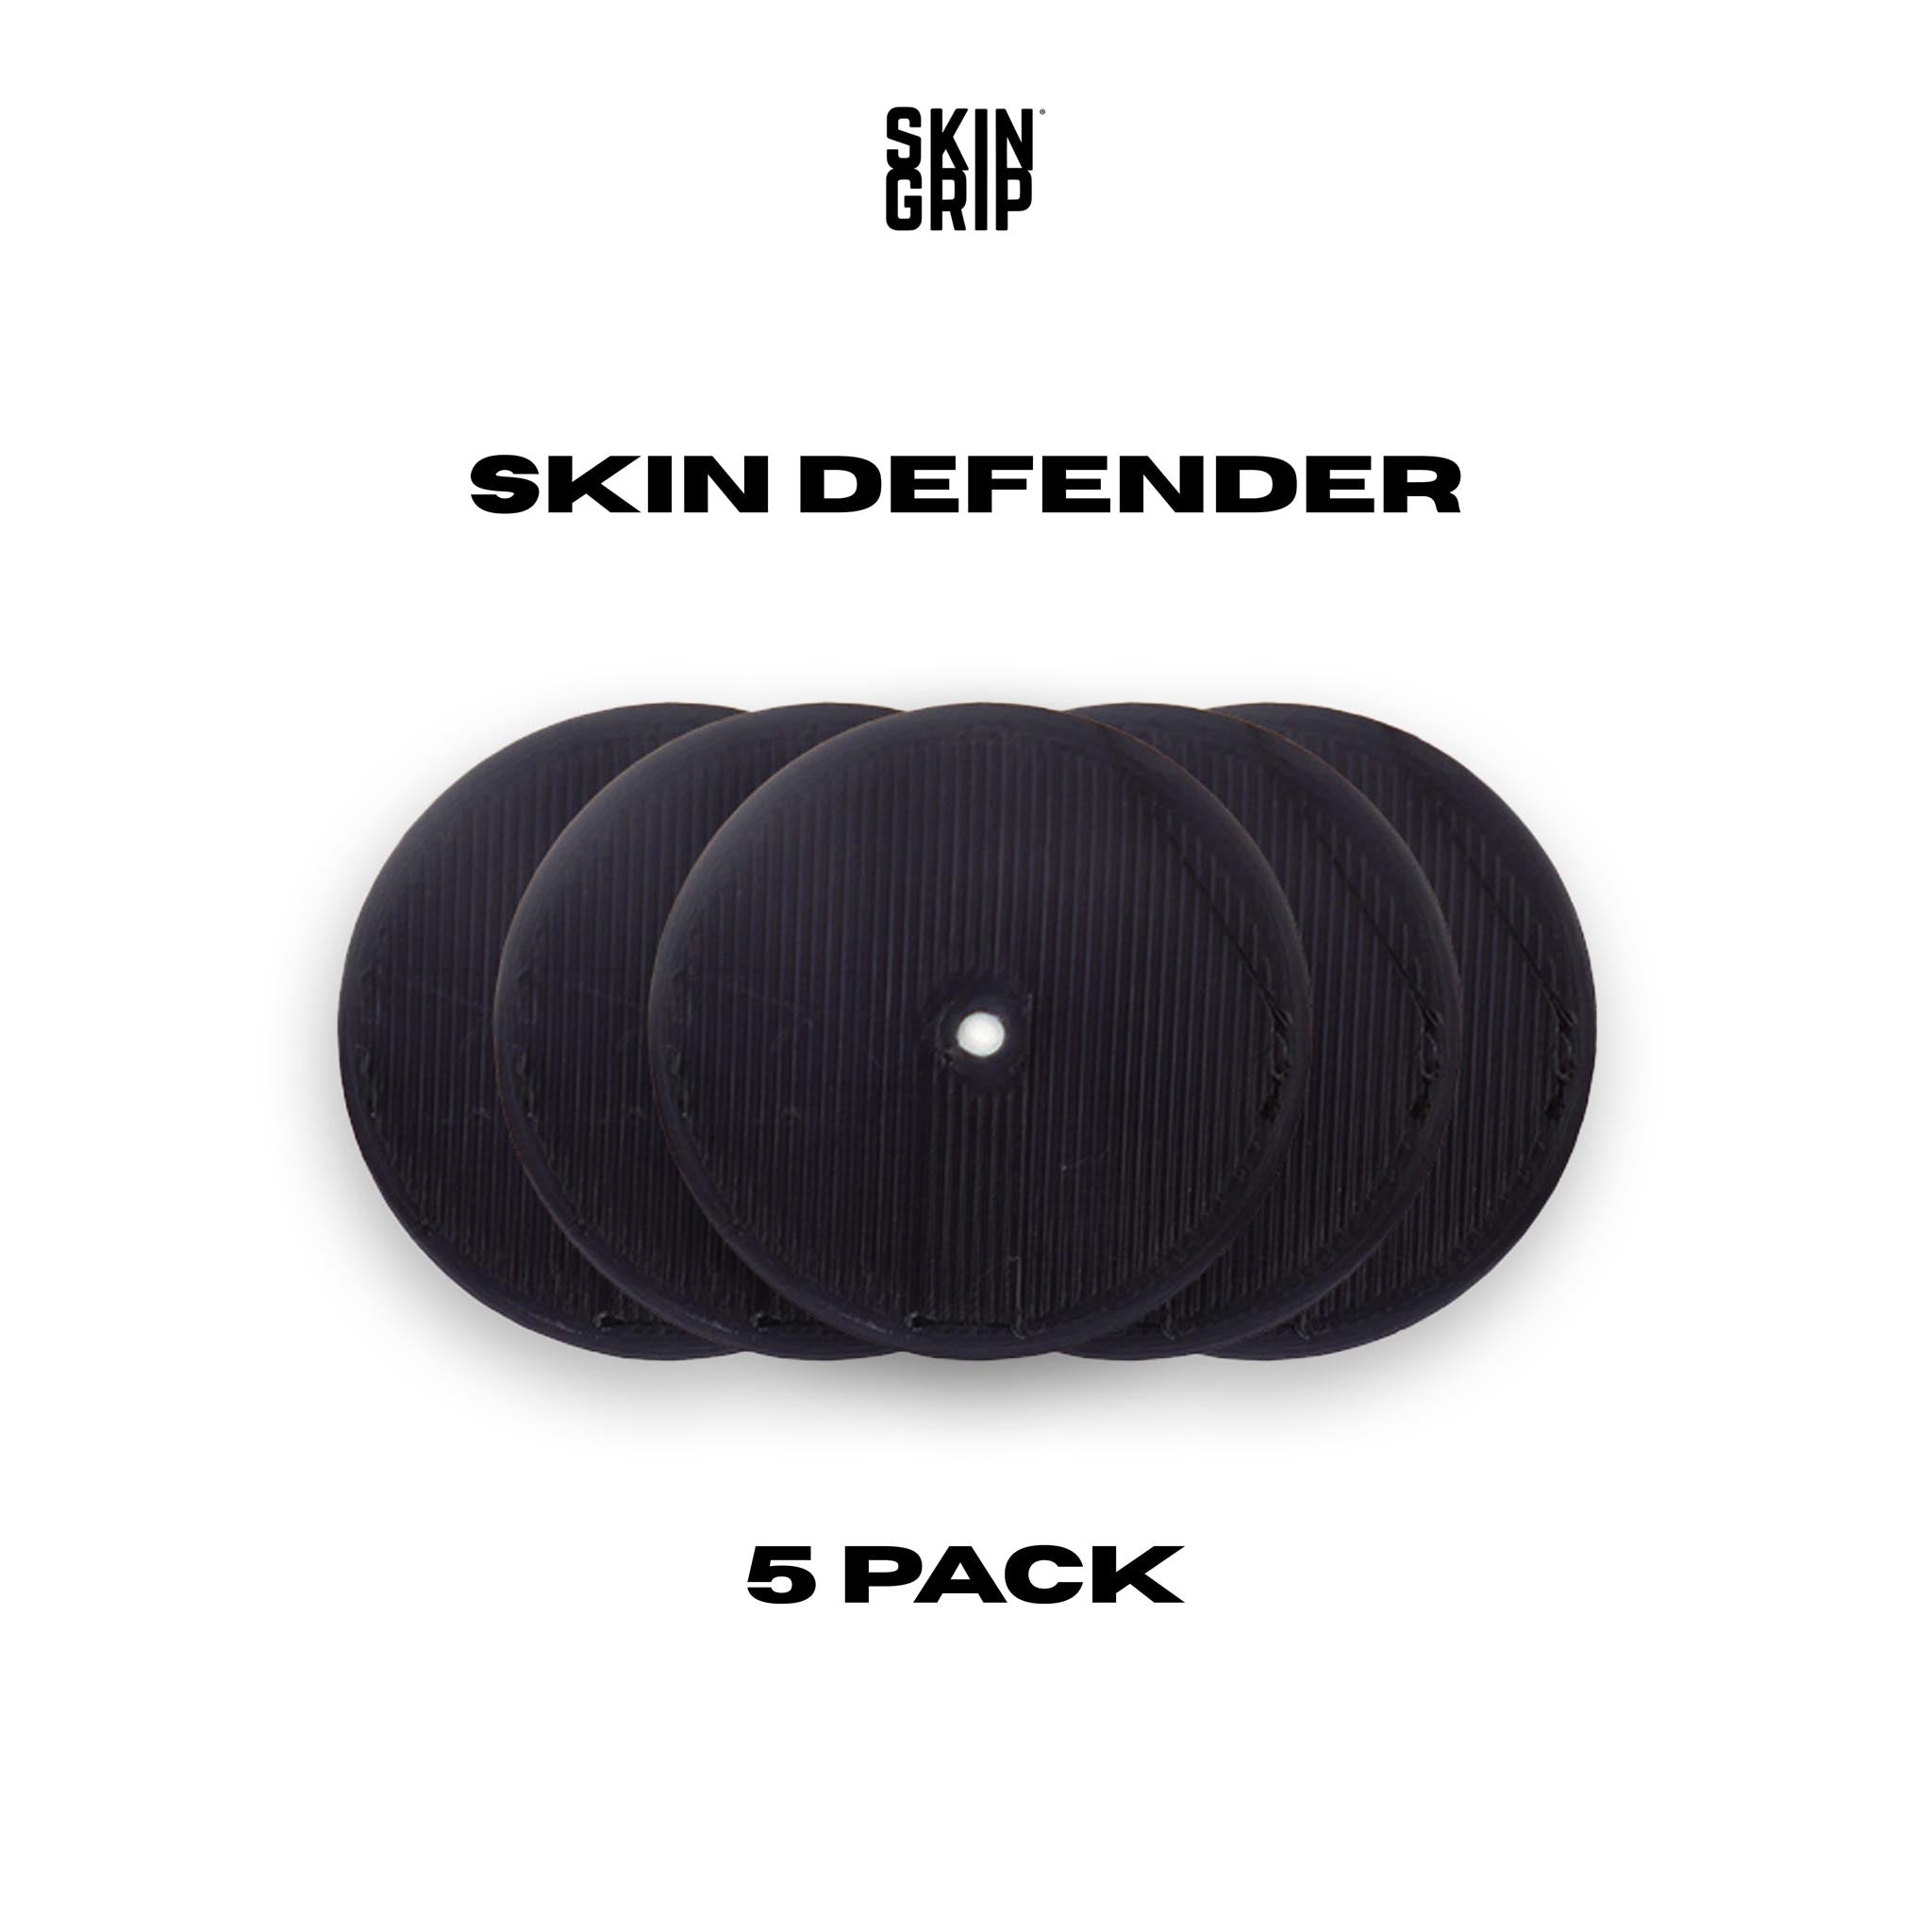 Skin Defender Reusable Non-Adhesive Barrier - 5 Pack